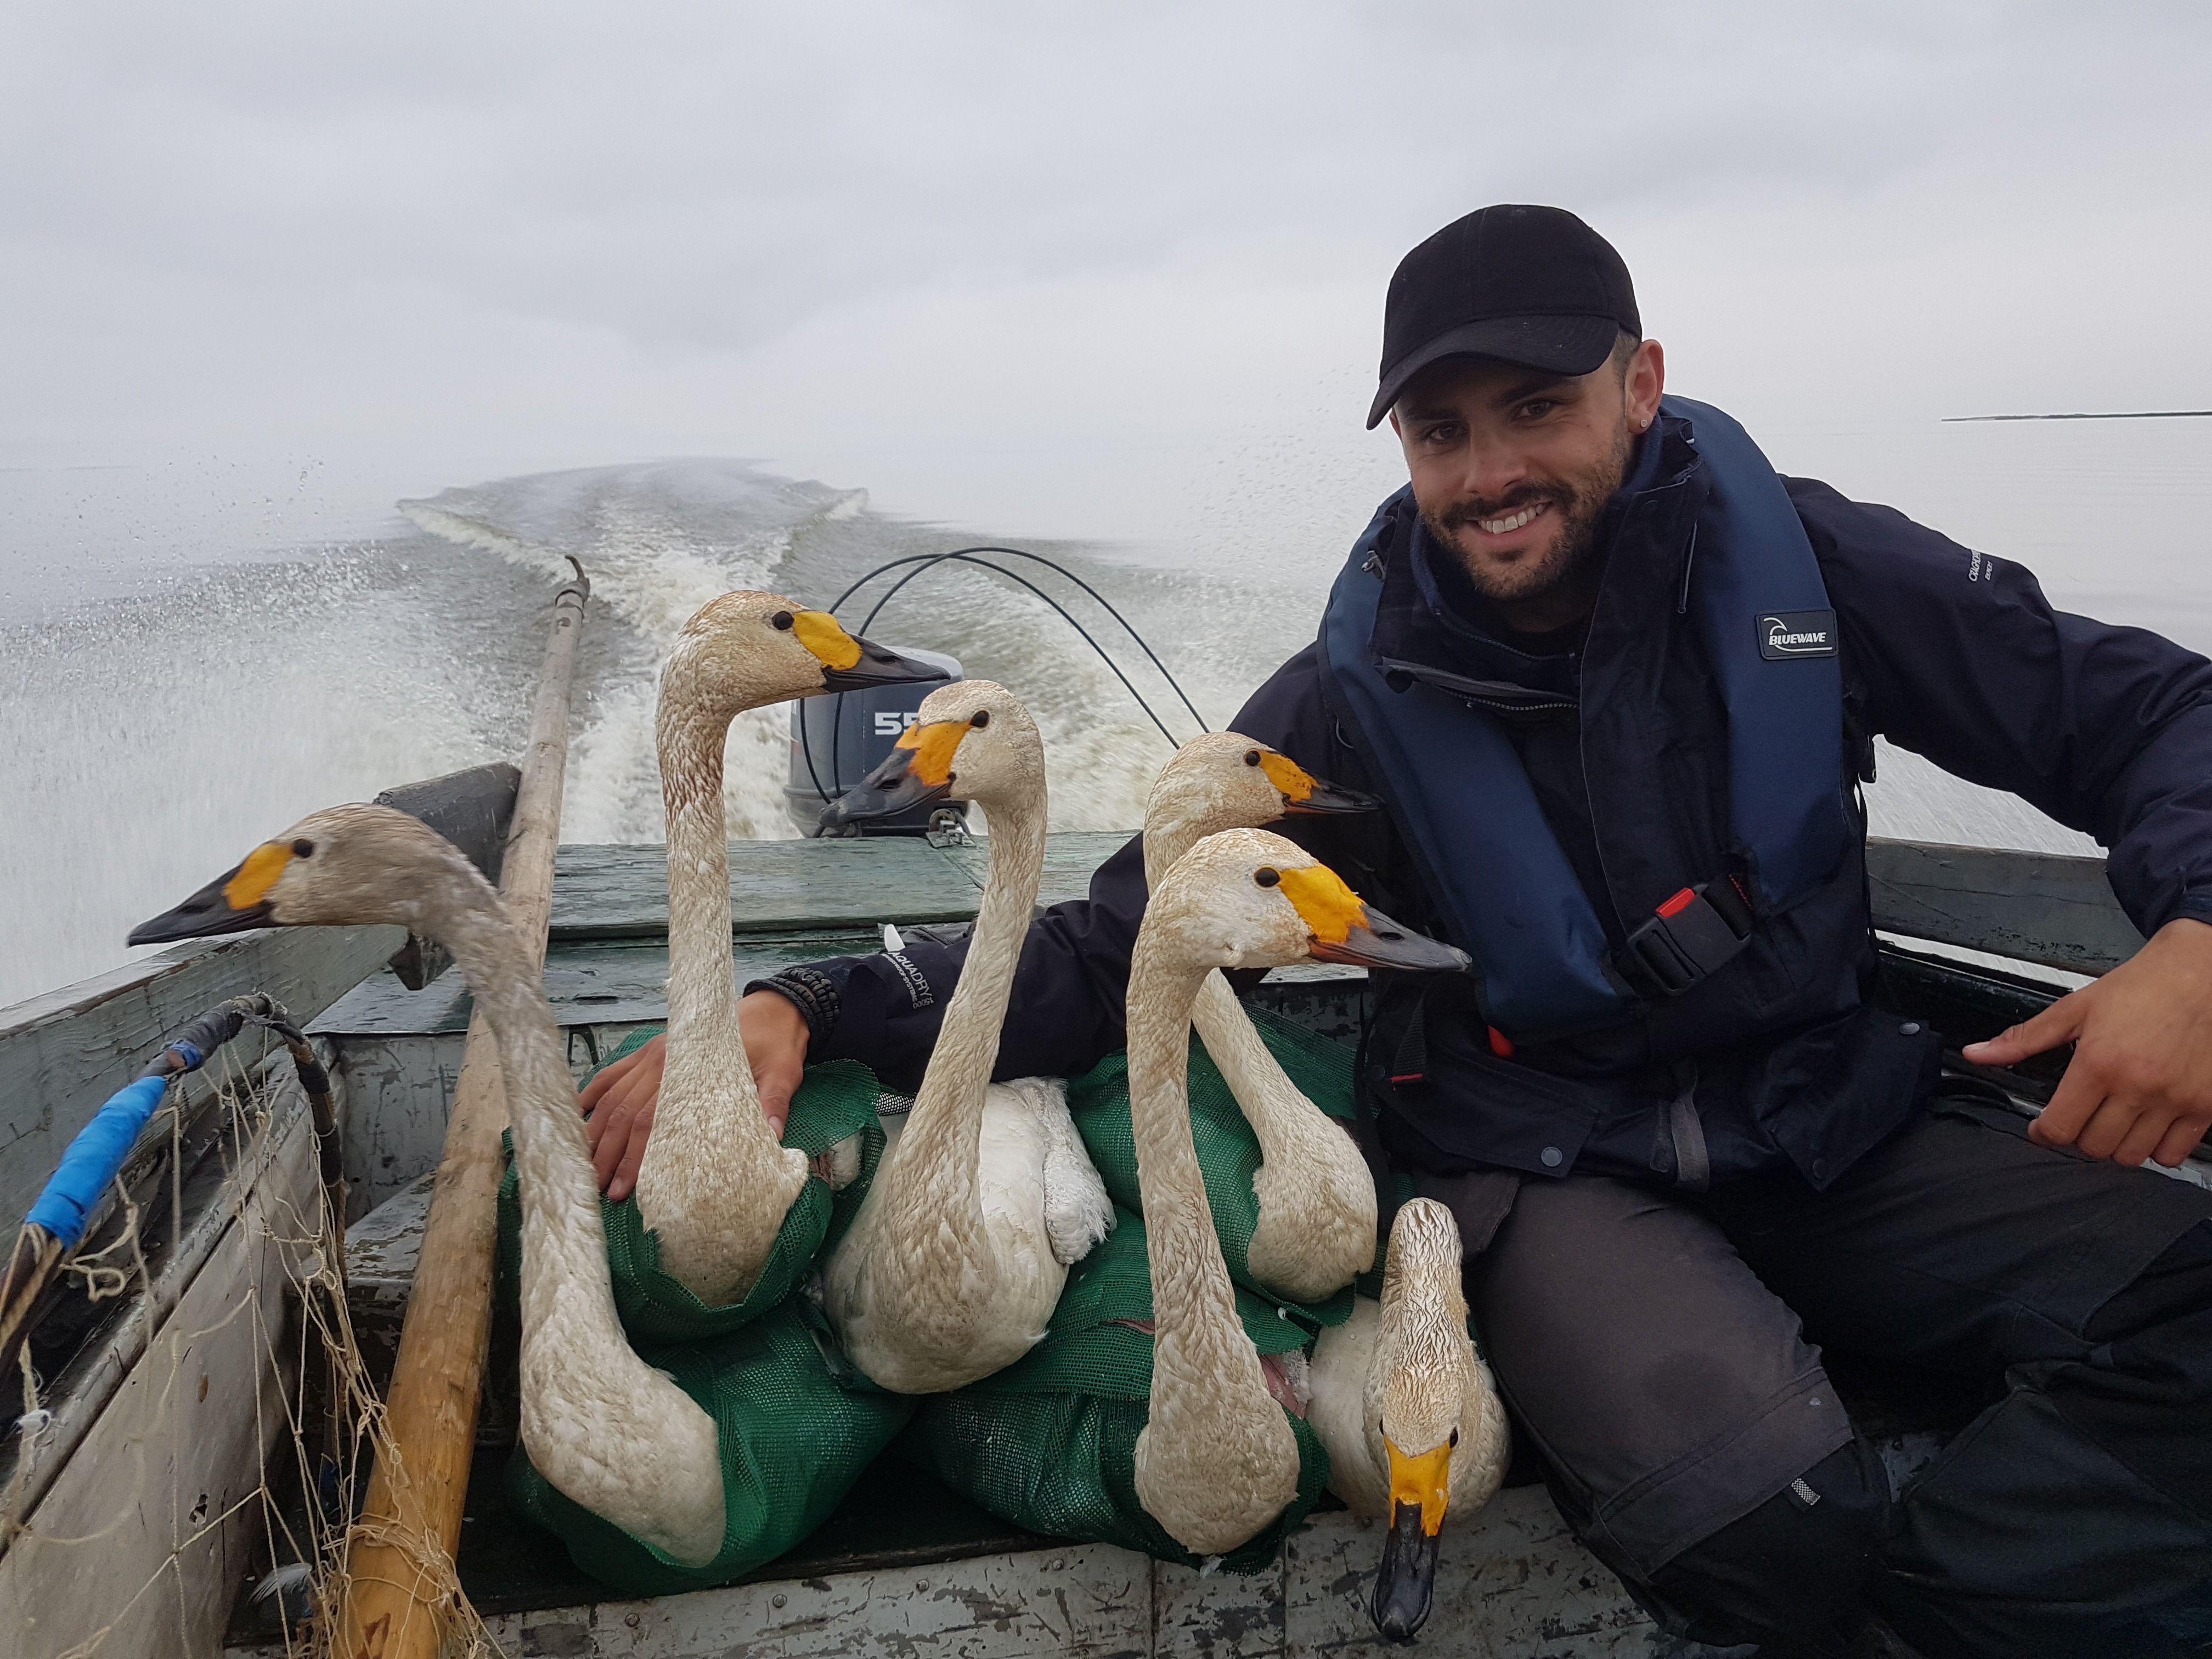 Swans with a Sun Logo - Wildfowl warden works to save the swans. Sun FM Radio